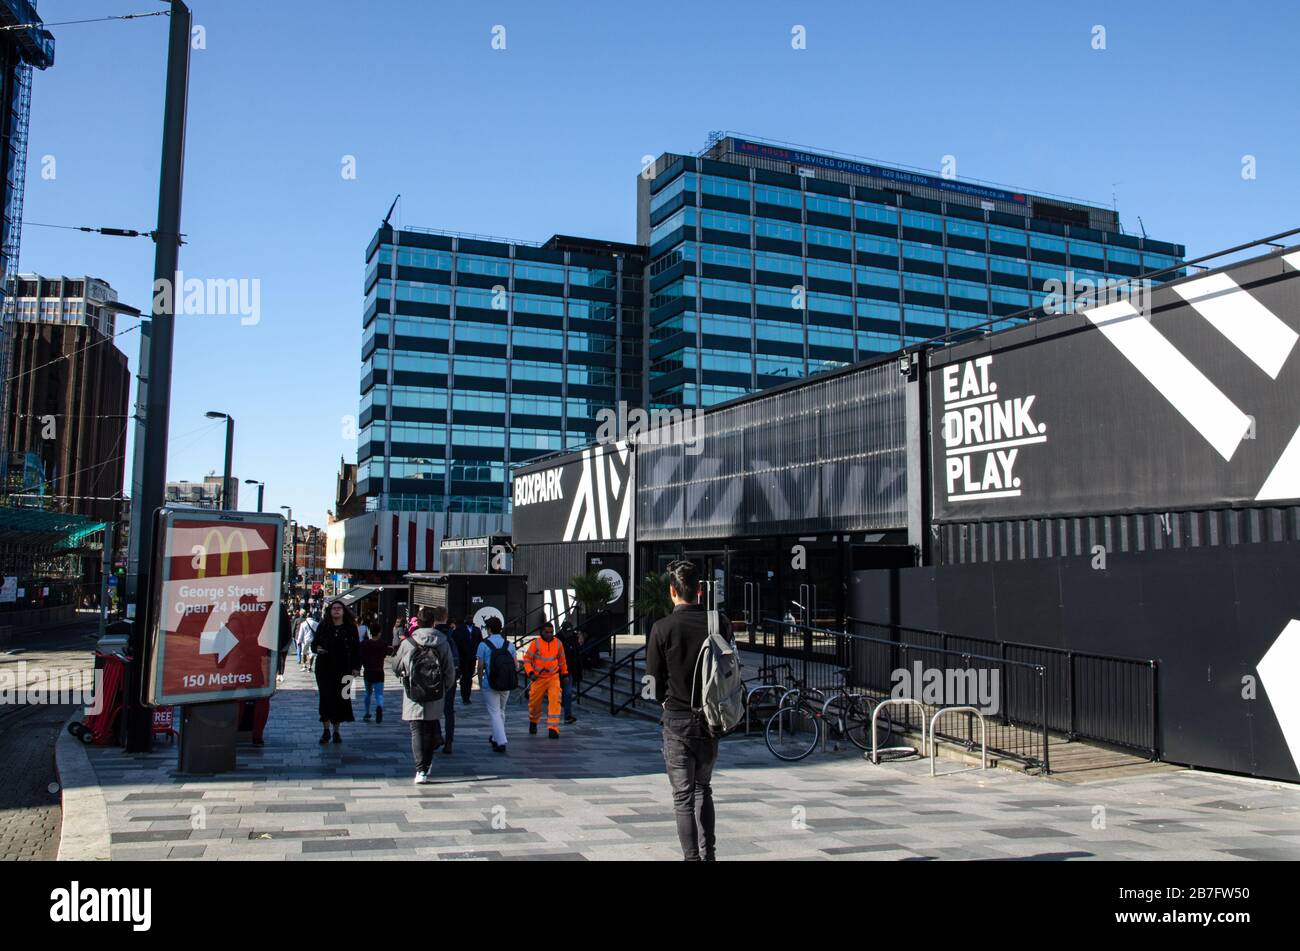 Croydon, UK - October 2, 2019: Pedestrians passing the catering and bar offerings of the Boxpark development in East Croydon on a sunny autumn morning Stock Photo